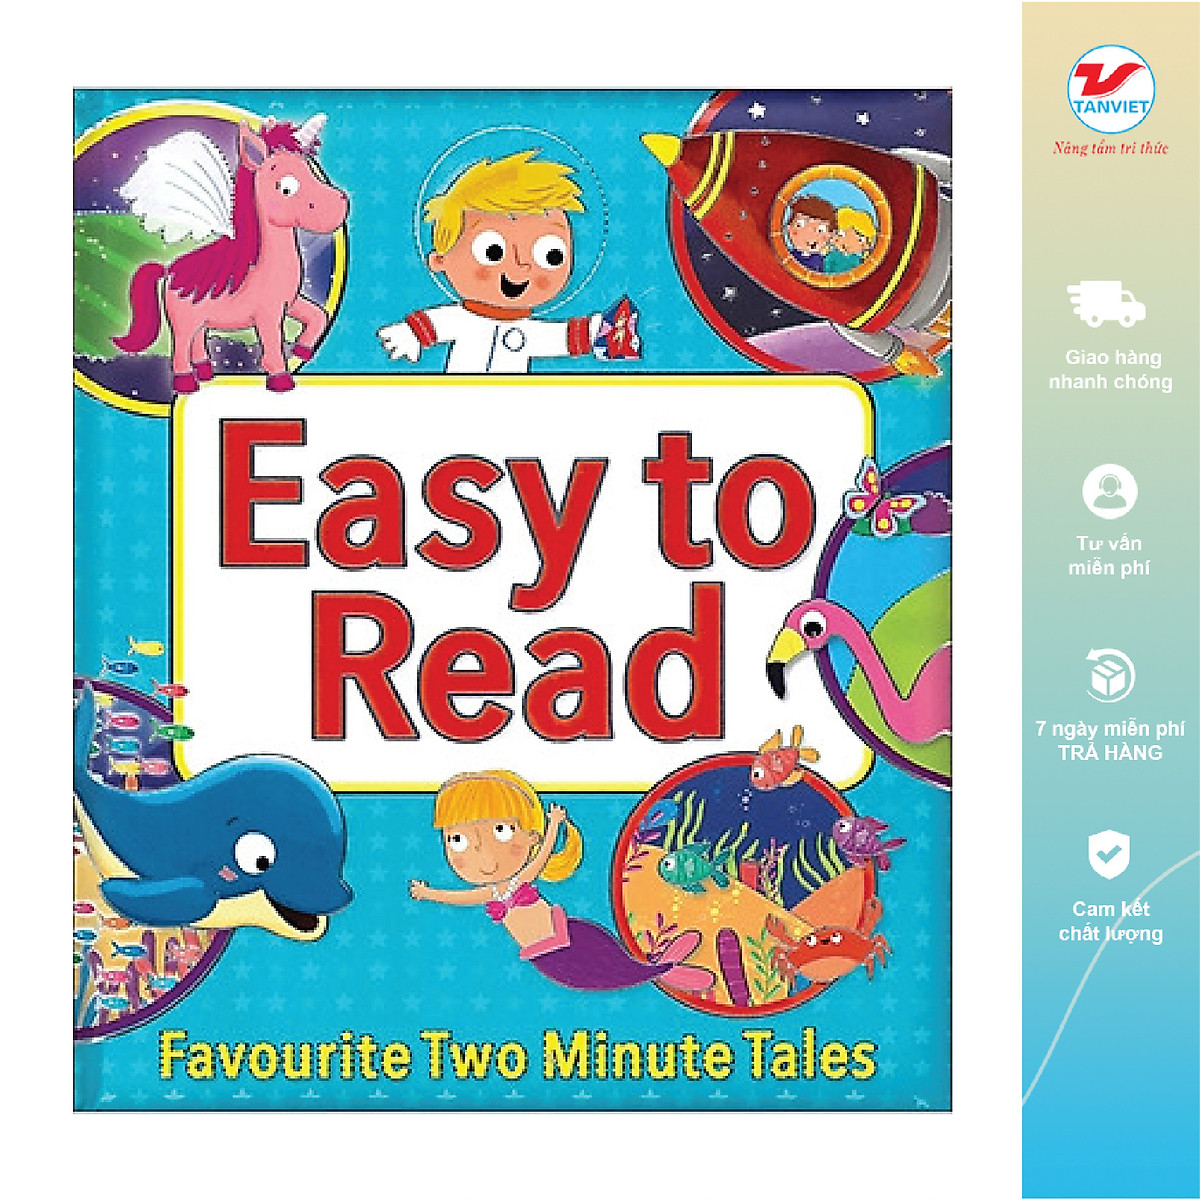 Easy To Read Favourite Two Minute Tales